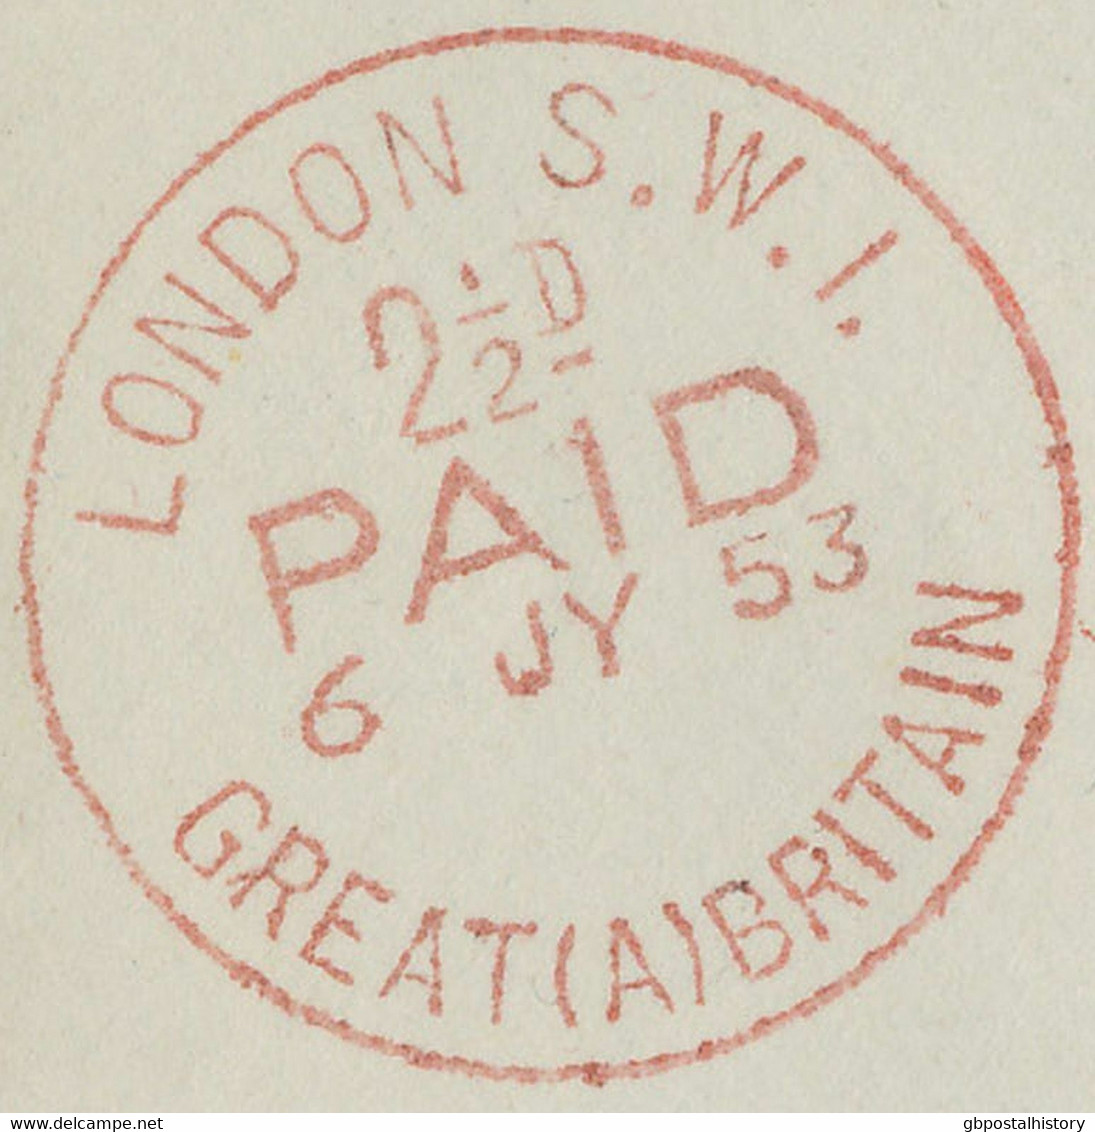 GB "LONDON S.W.I. / 2 1/2 D. / PAID / 6 JY 53 / GREAT (A) BRITAIN" Roter CDS Cvr - Officials